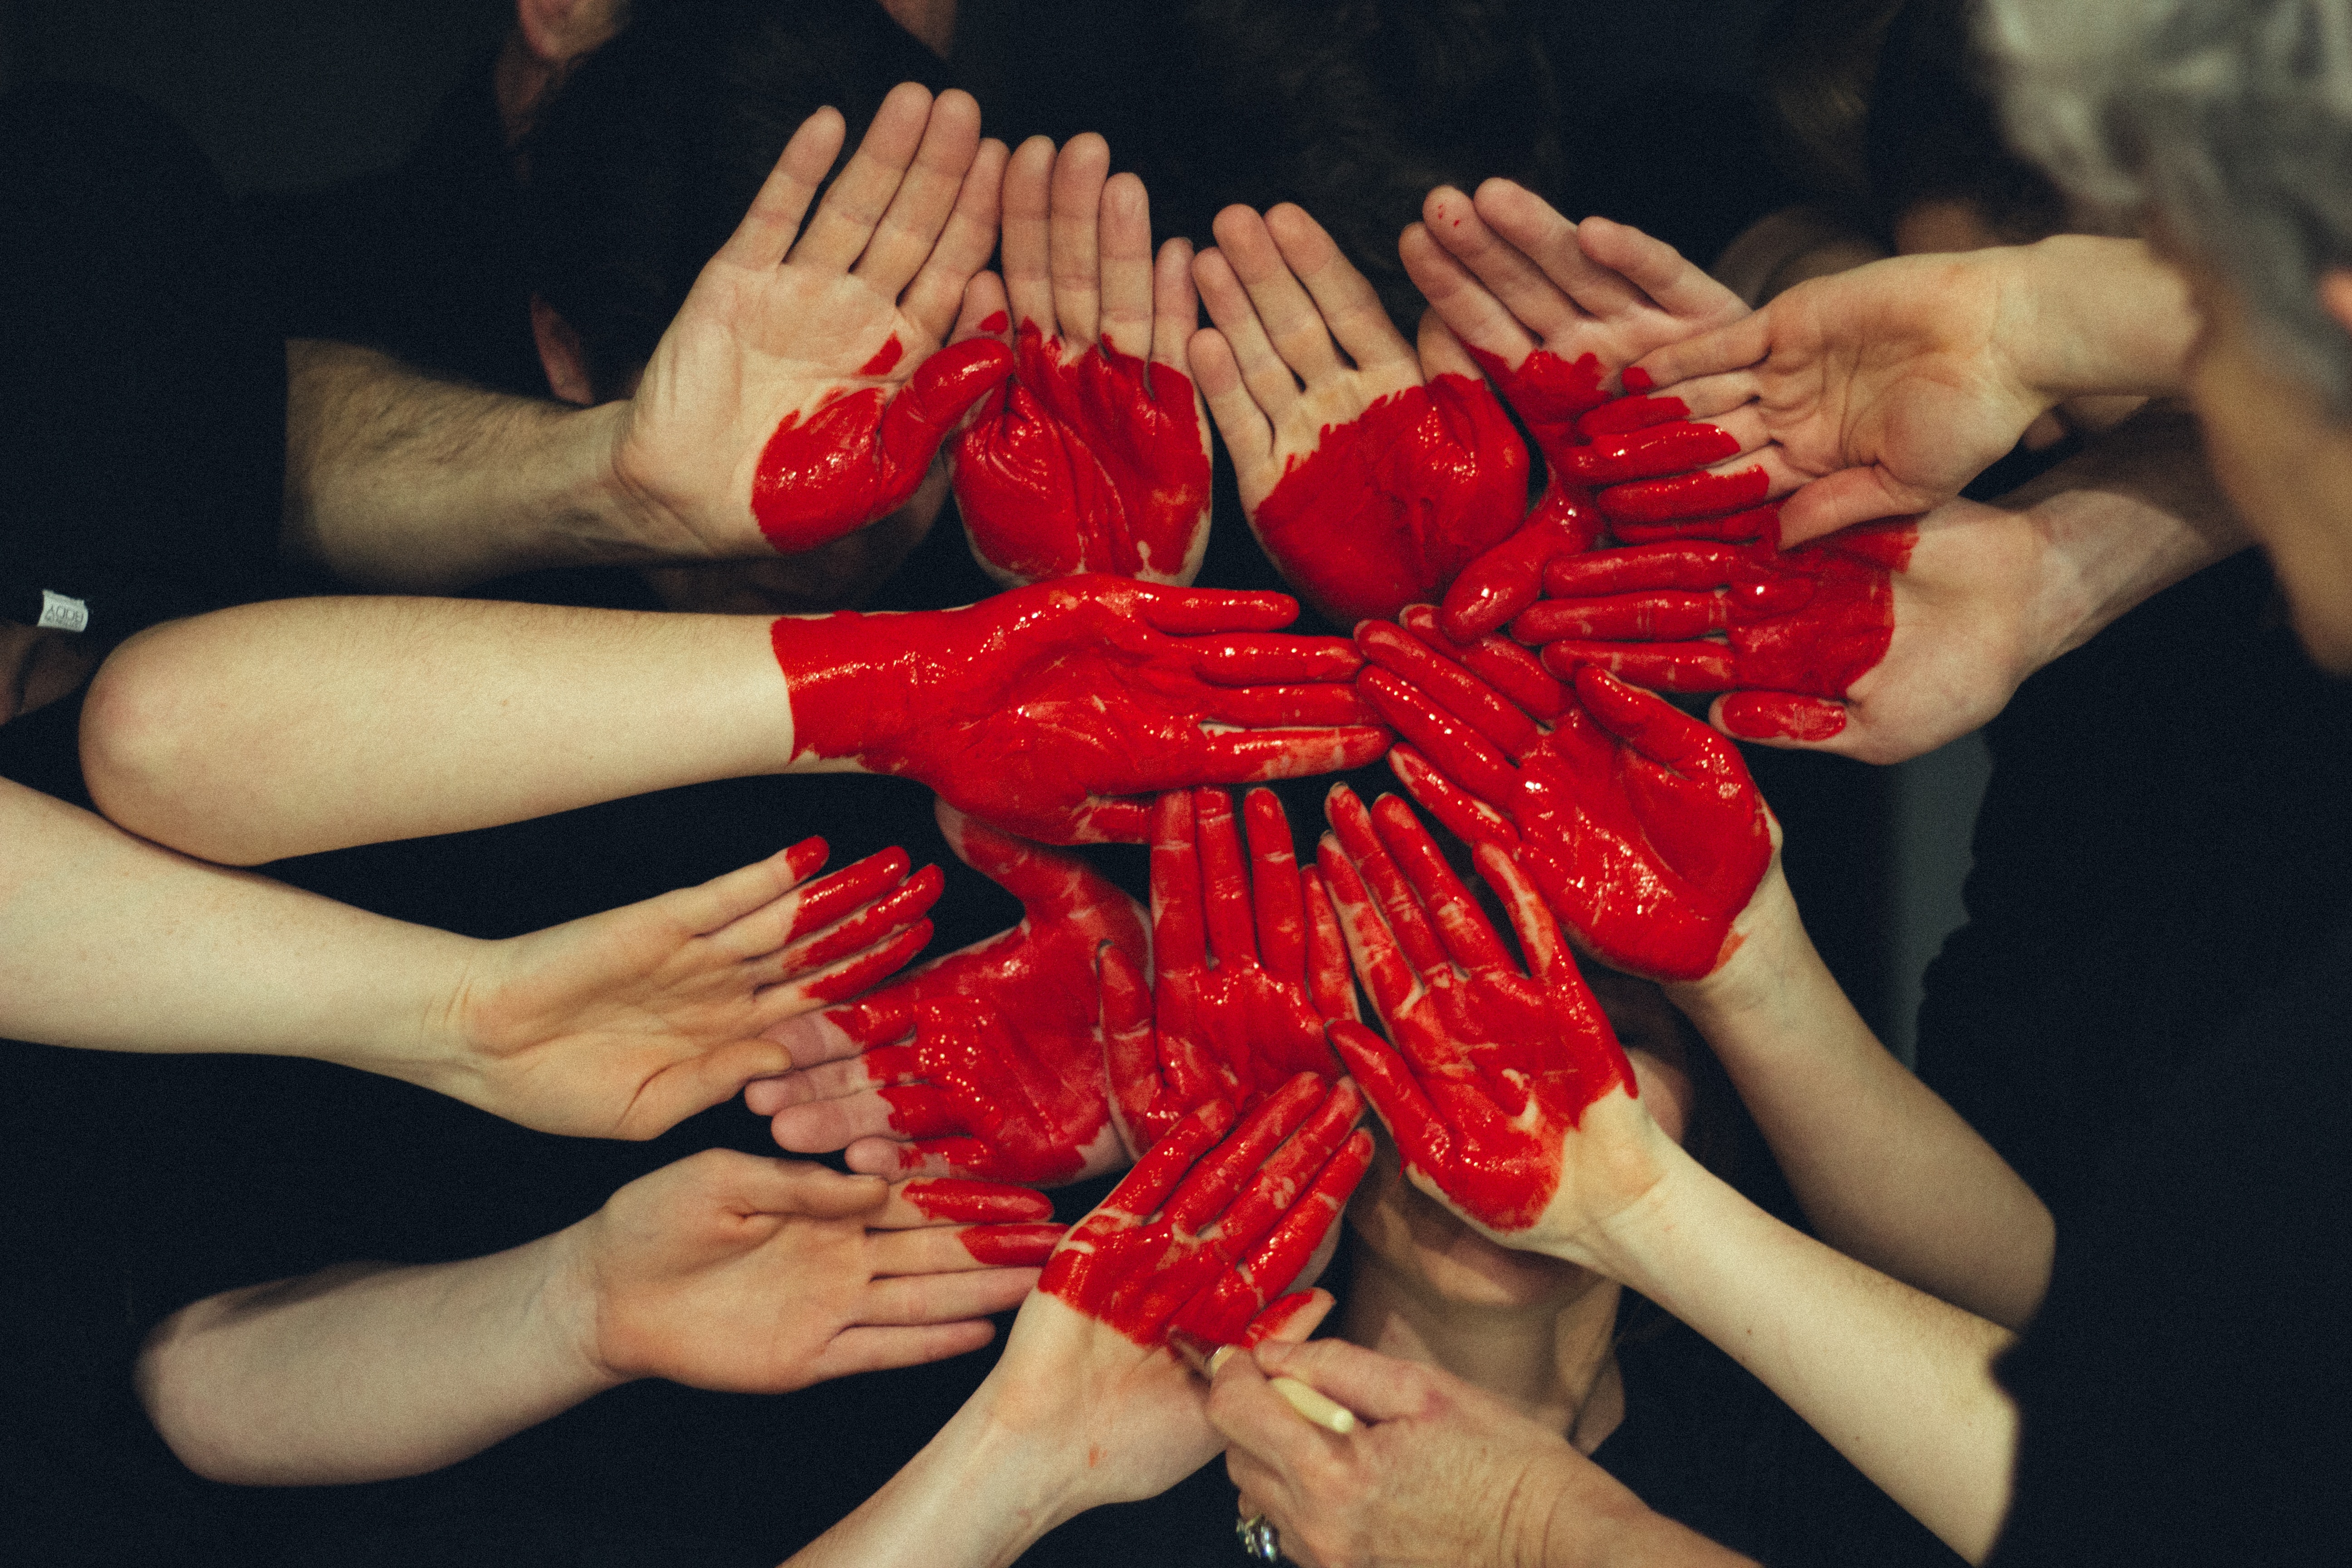 A number of individuals putting their painted hands together to form a picture of a heart. │ Source: Unsplash